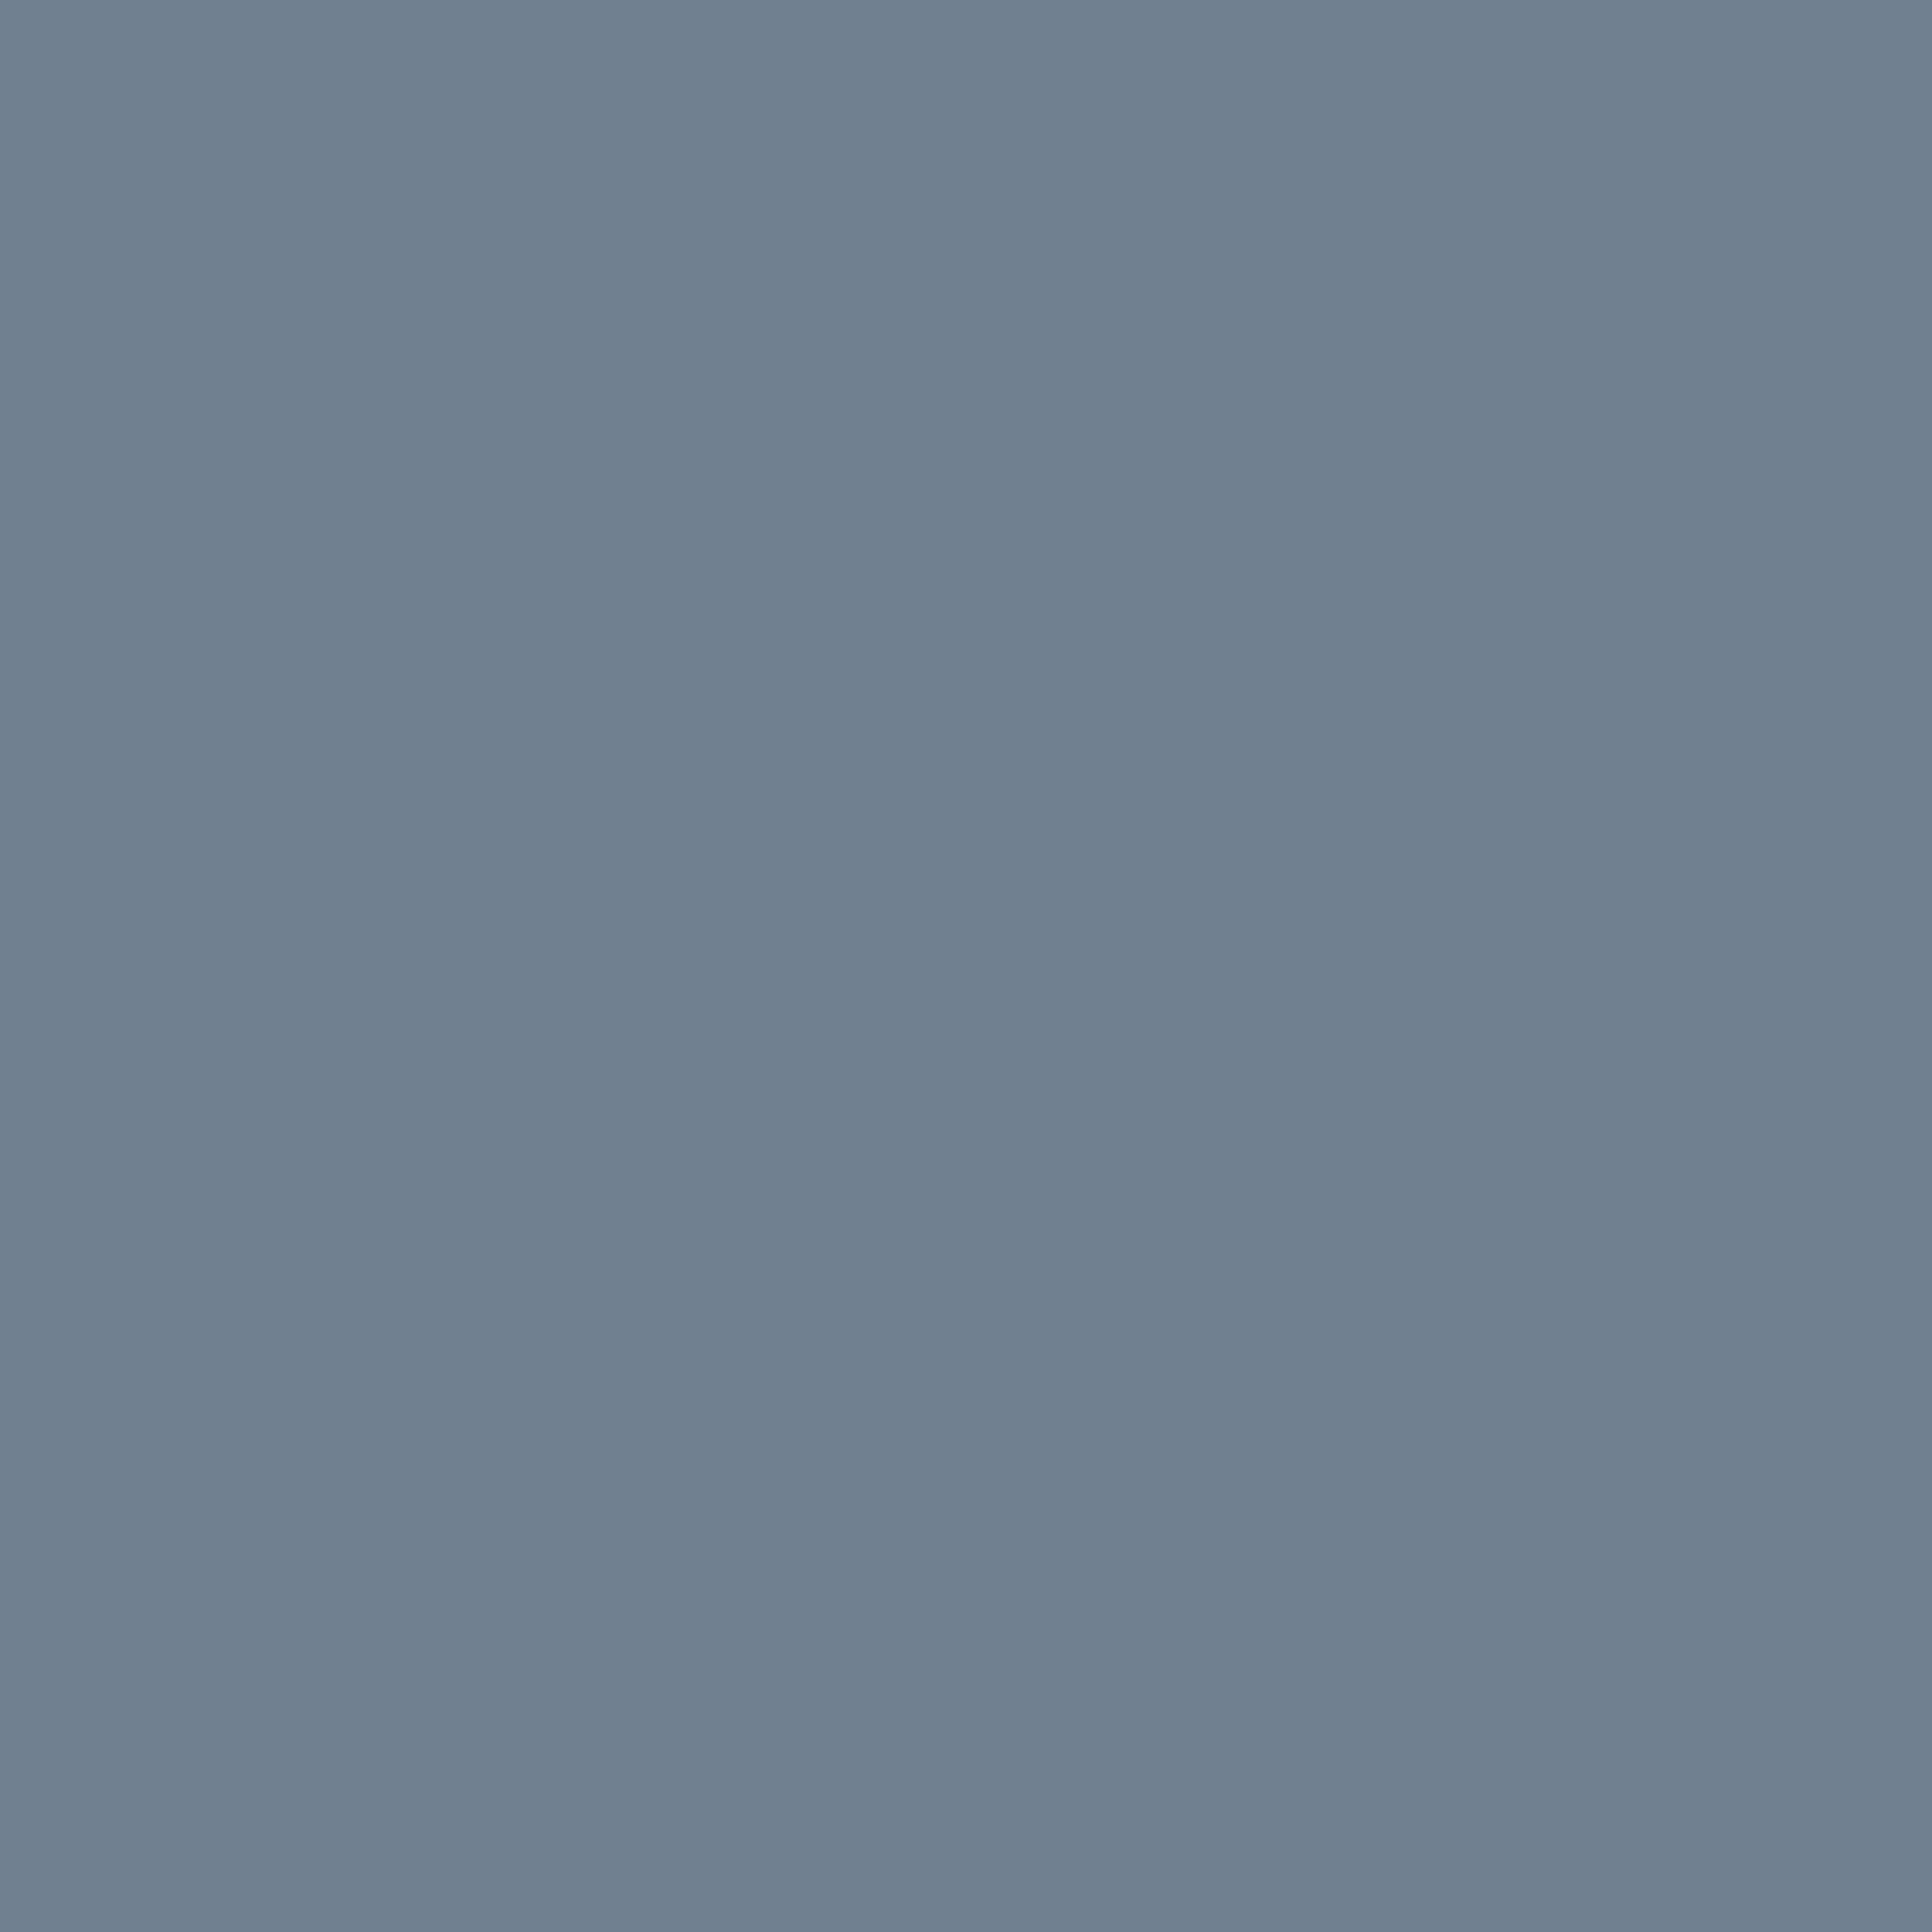 2732x2732 Slate Gray Solid Color Background